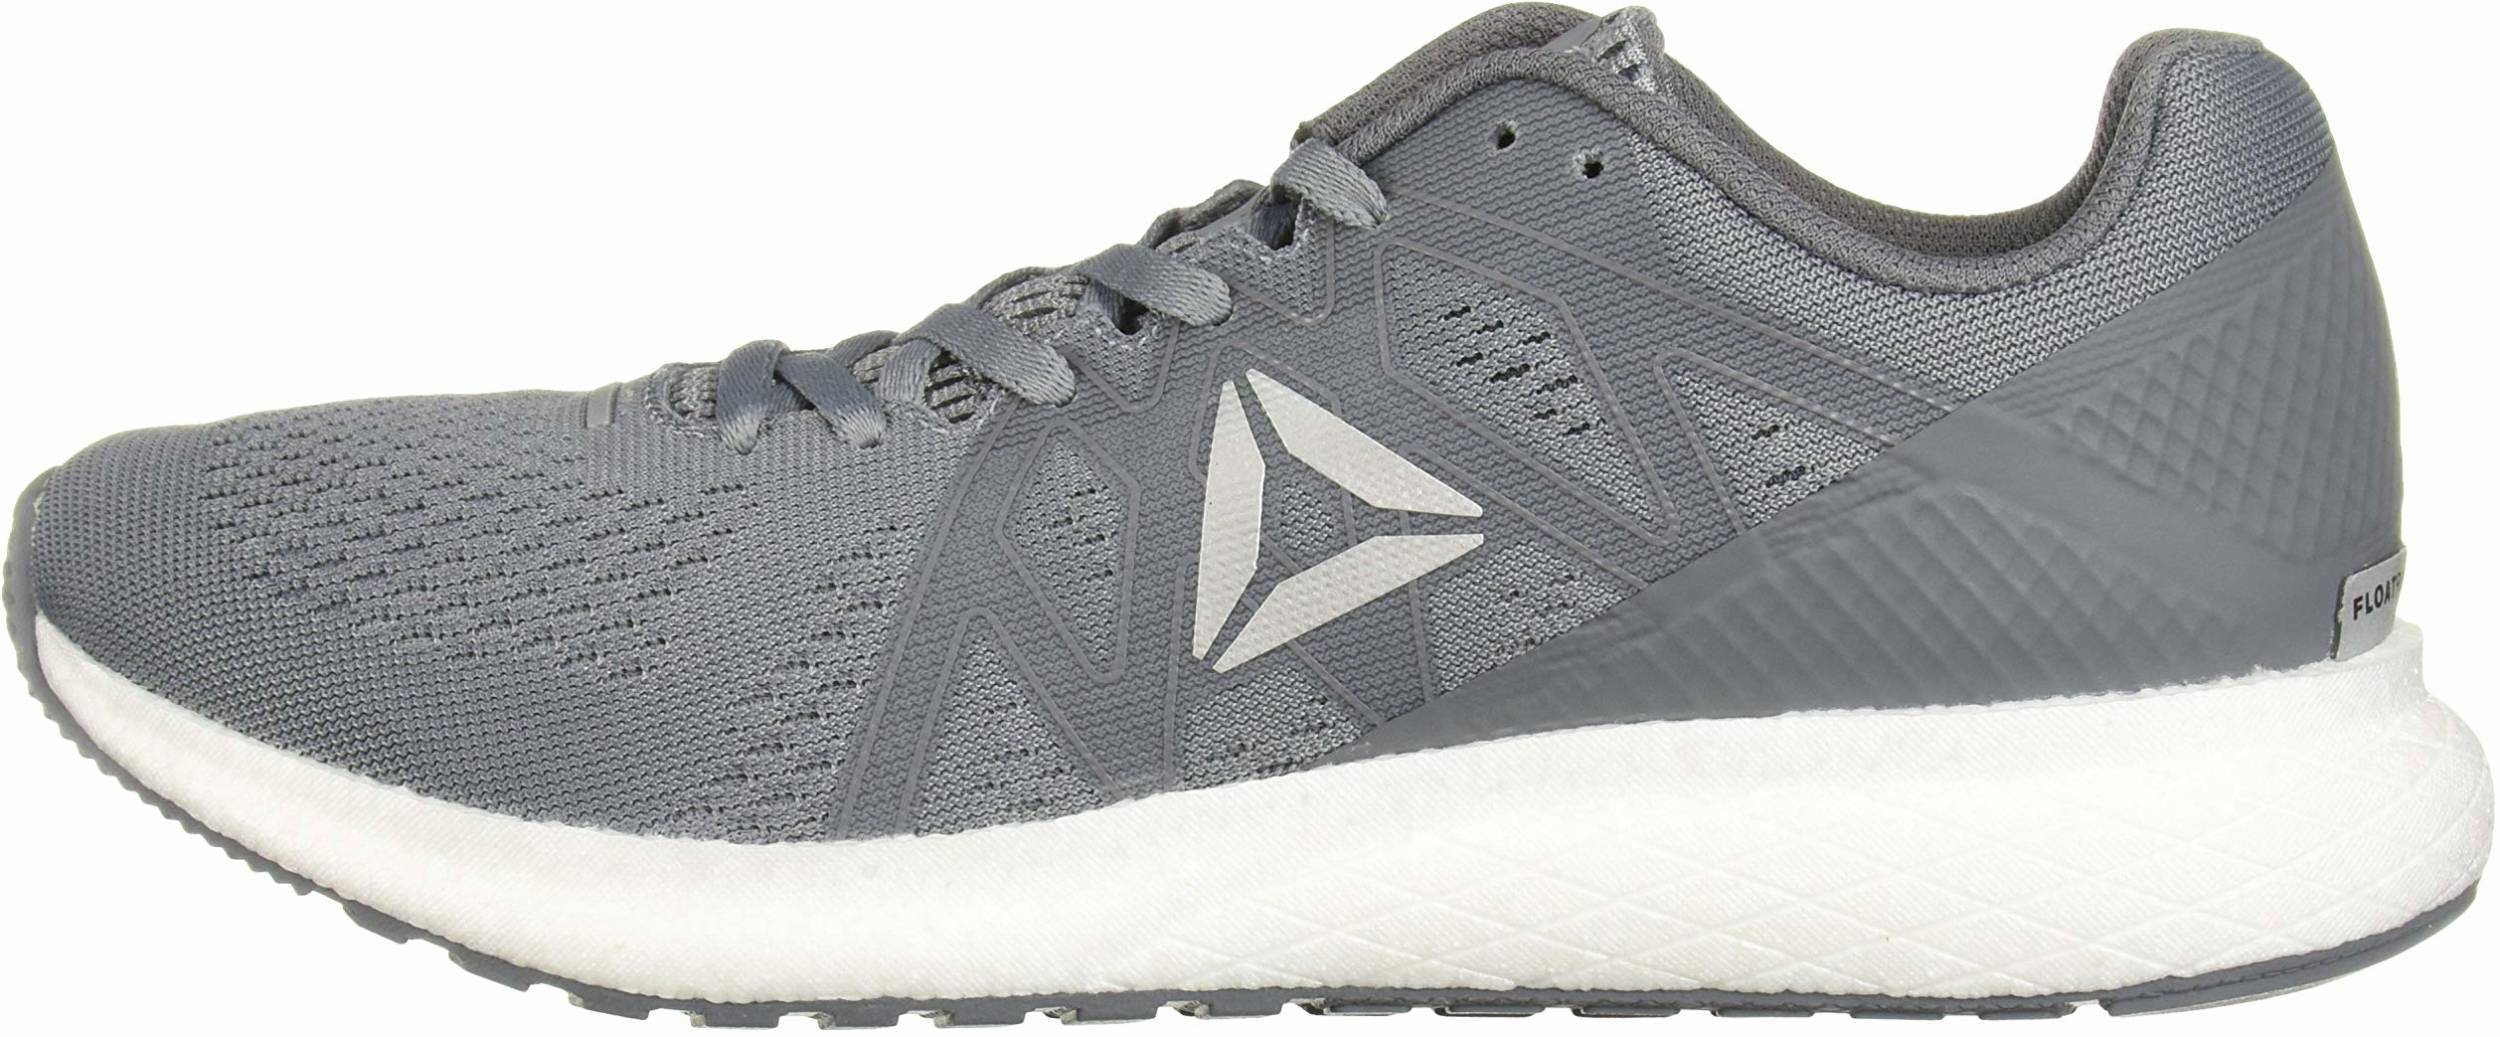 Save 52% on Reebok Running Shoes (120 